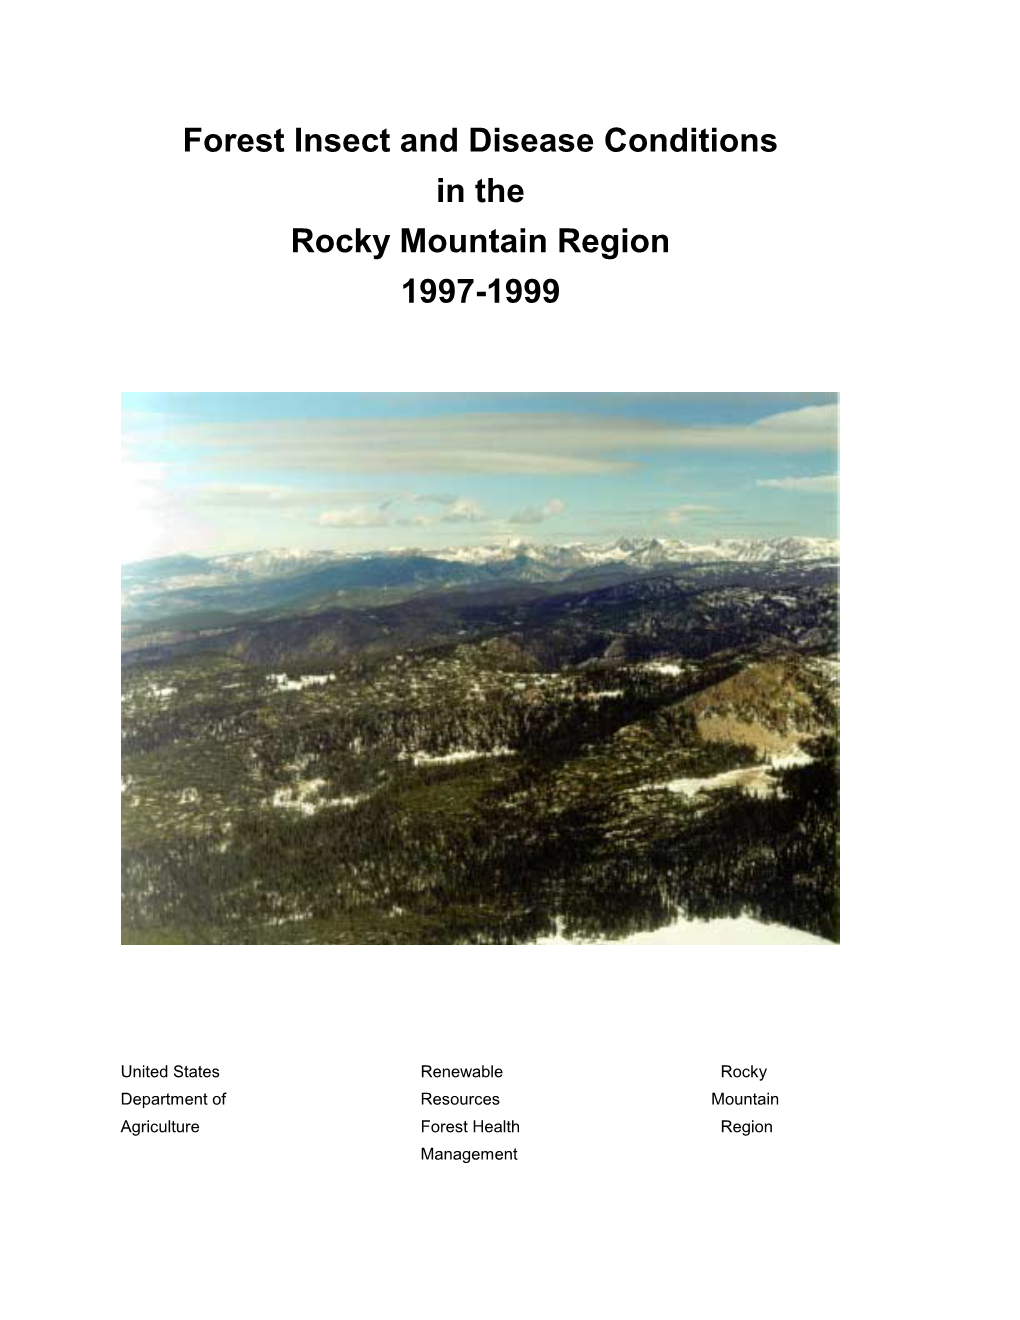 Forest Insect and Disease Conditions in the Rocky Mountain Region 1997-1999